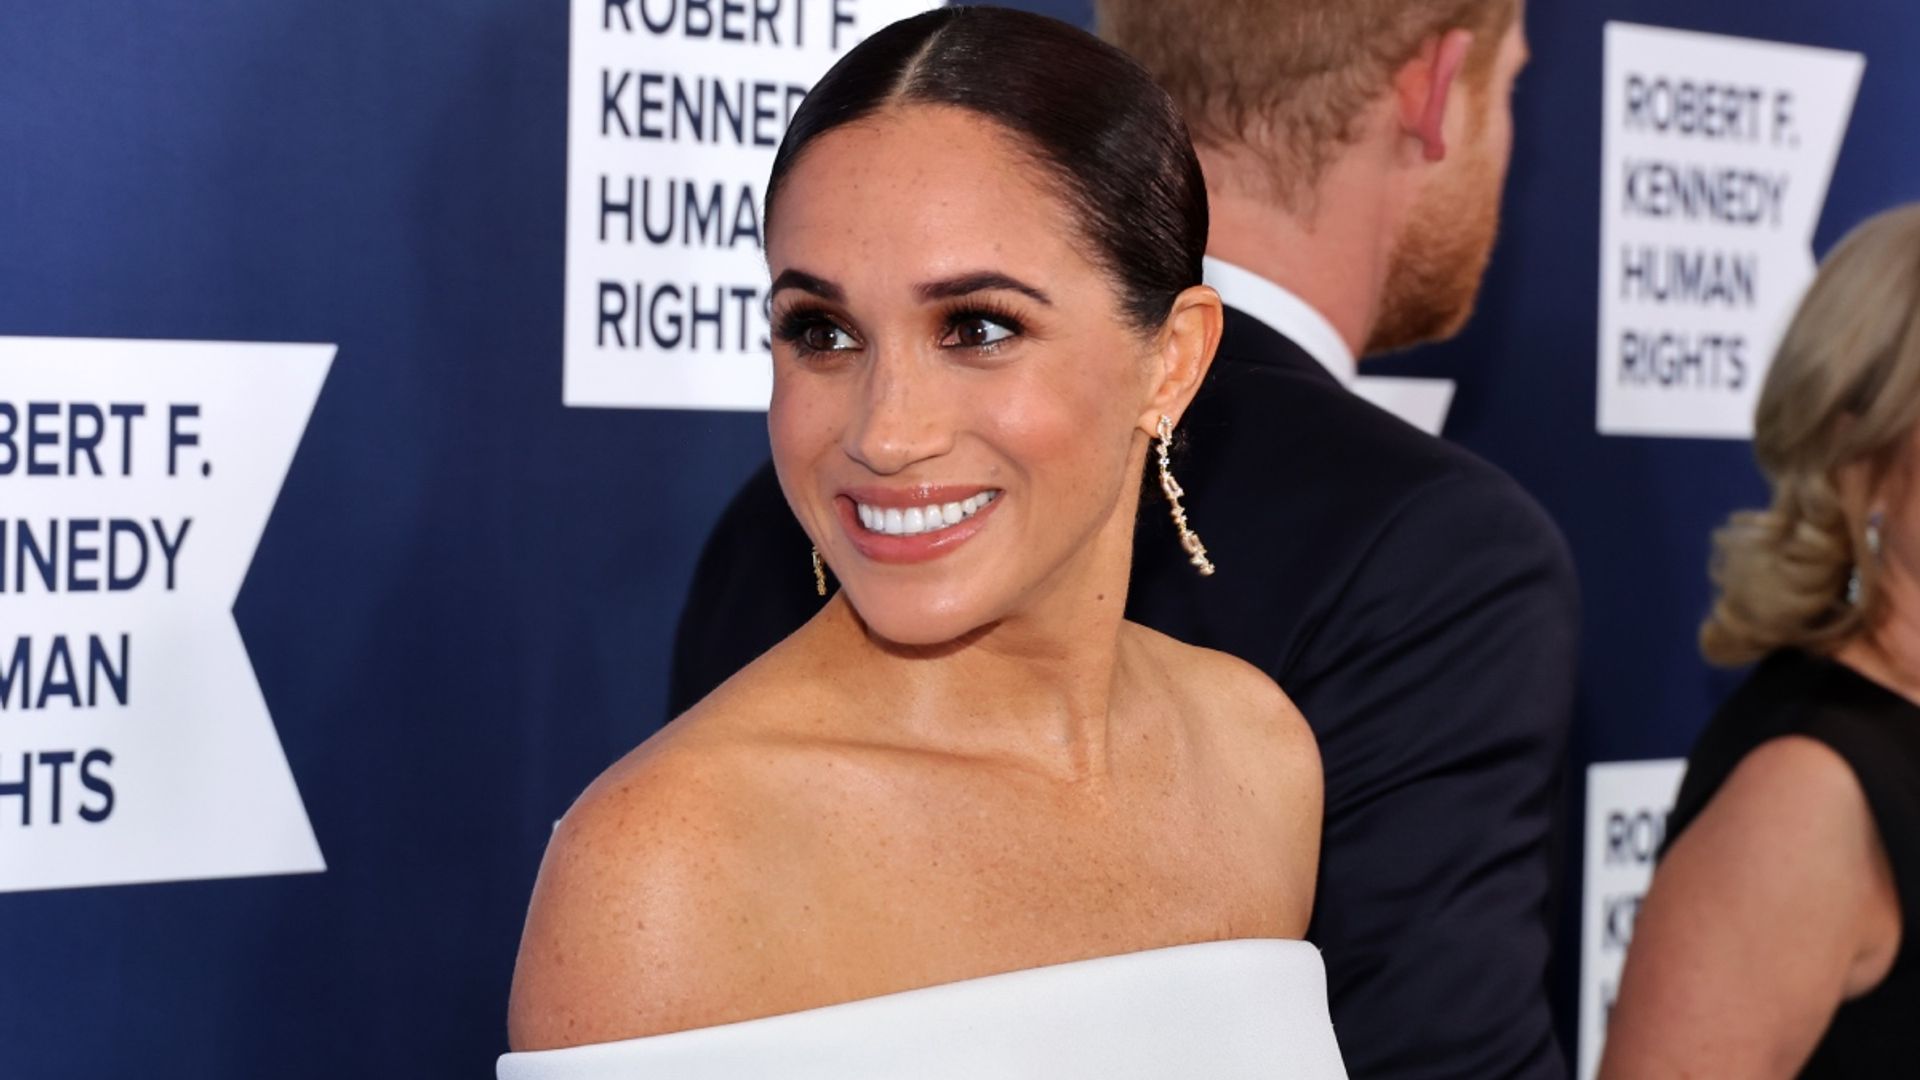 meghan markle ripple of hope outfit